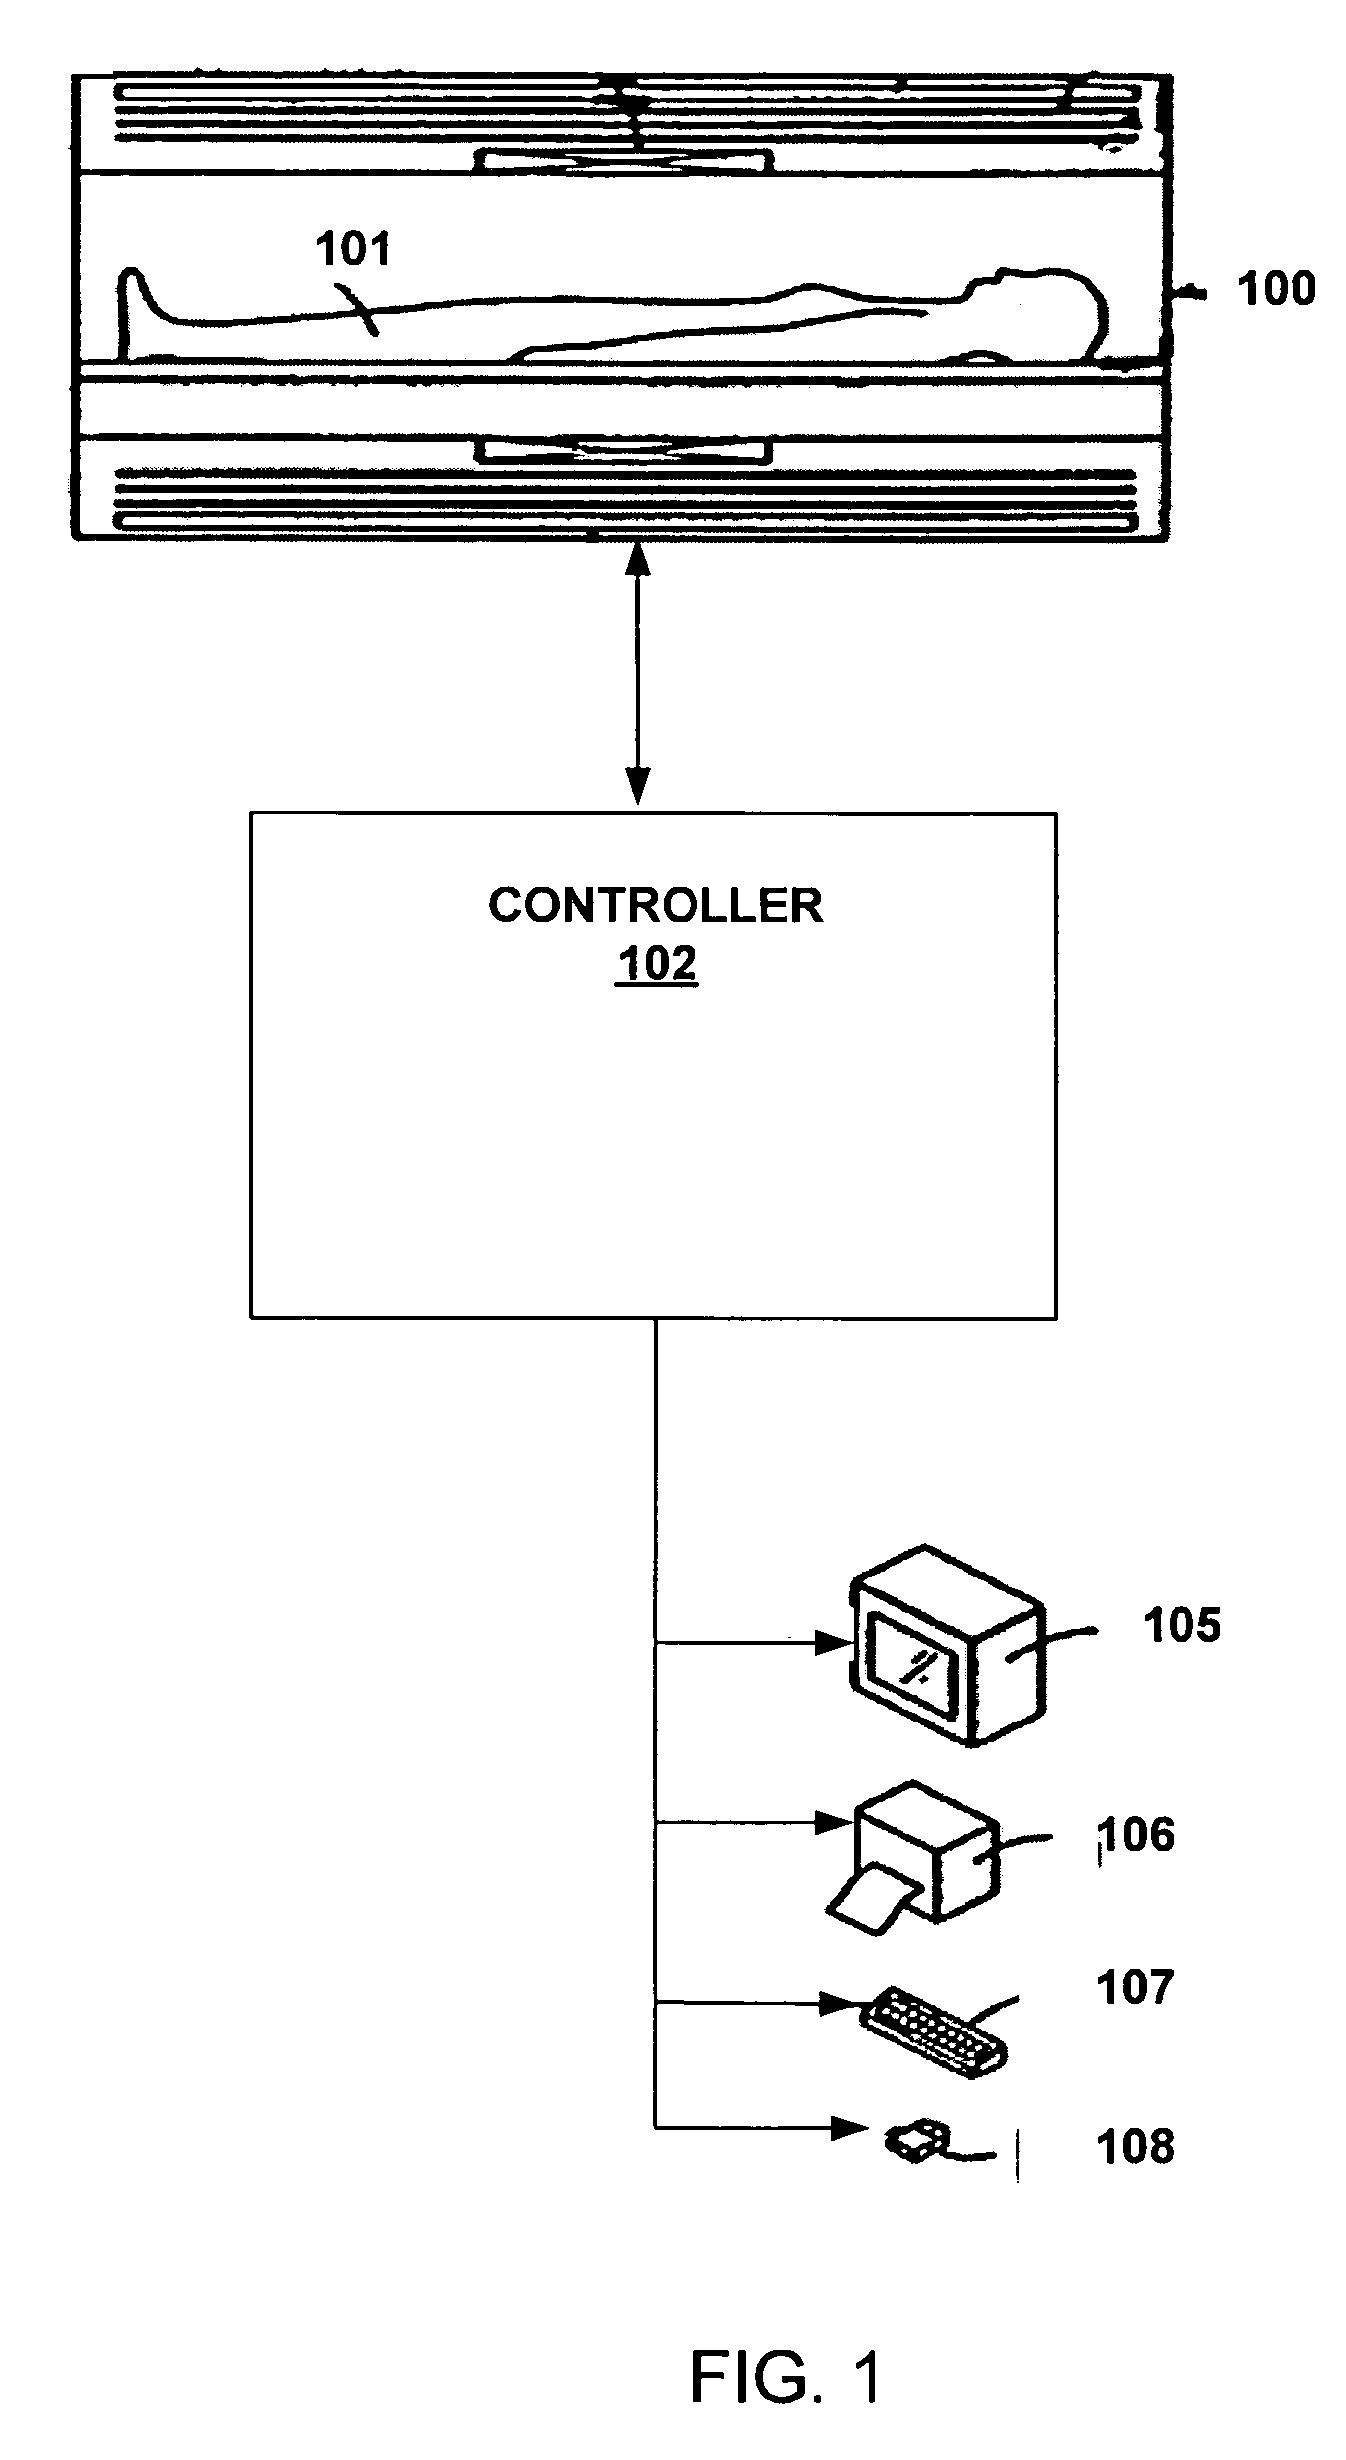 Method and apparatus for phase-sensitive magnetic resonance imaging